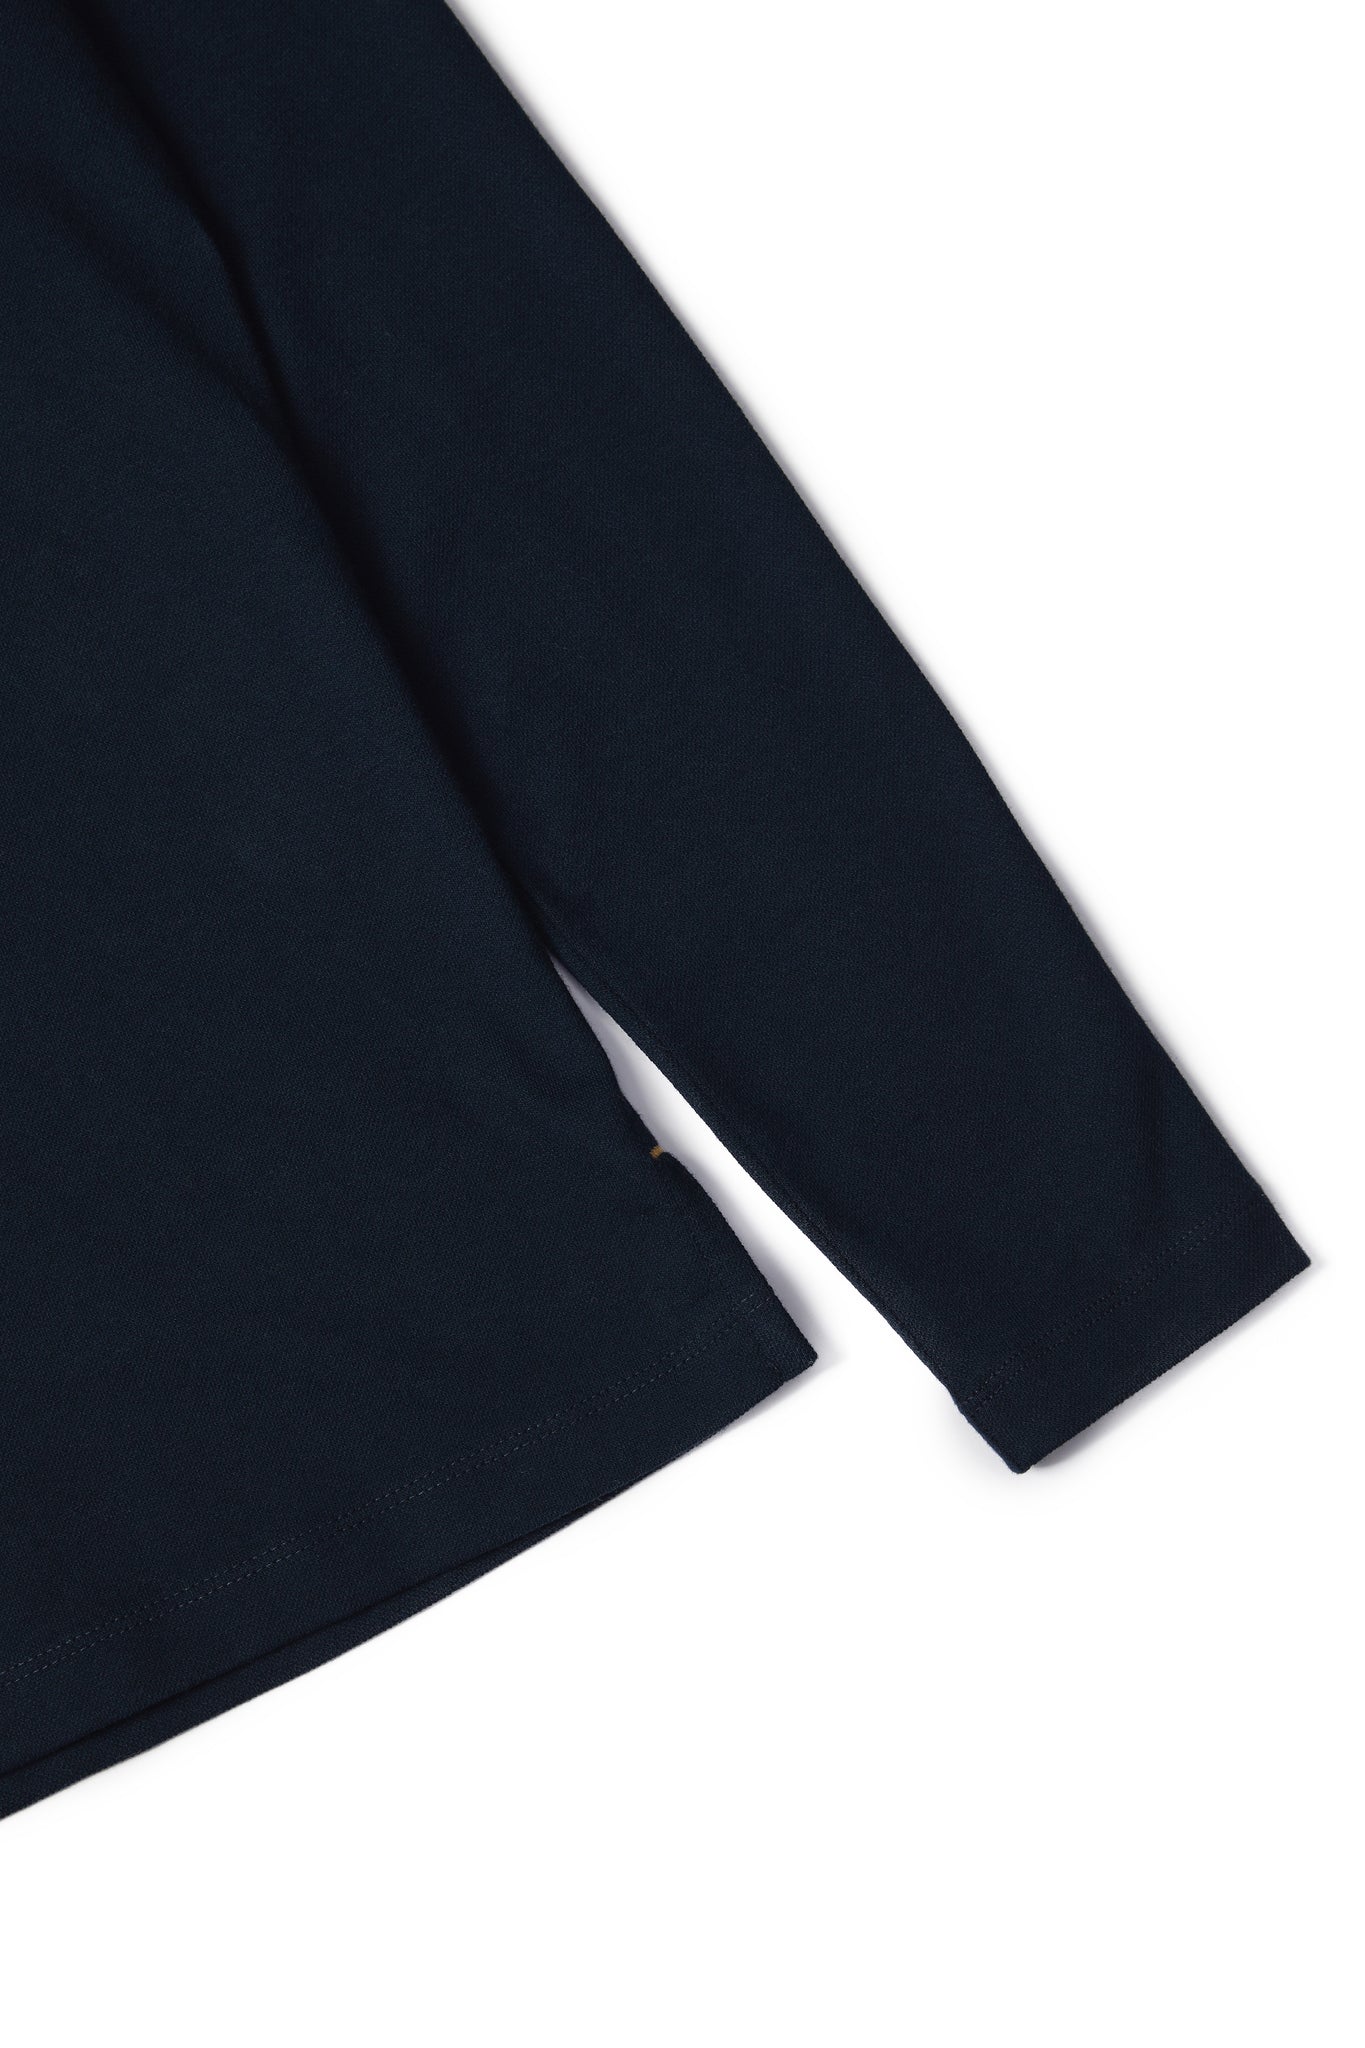 Long Sleeve Crest Polo (Ink Navy)